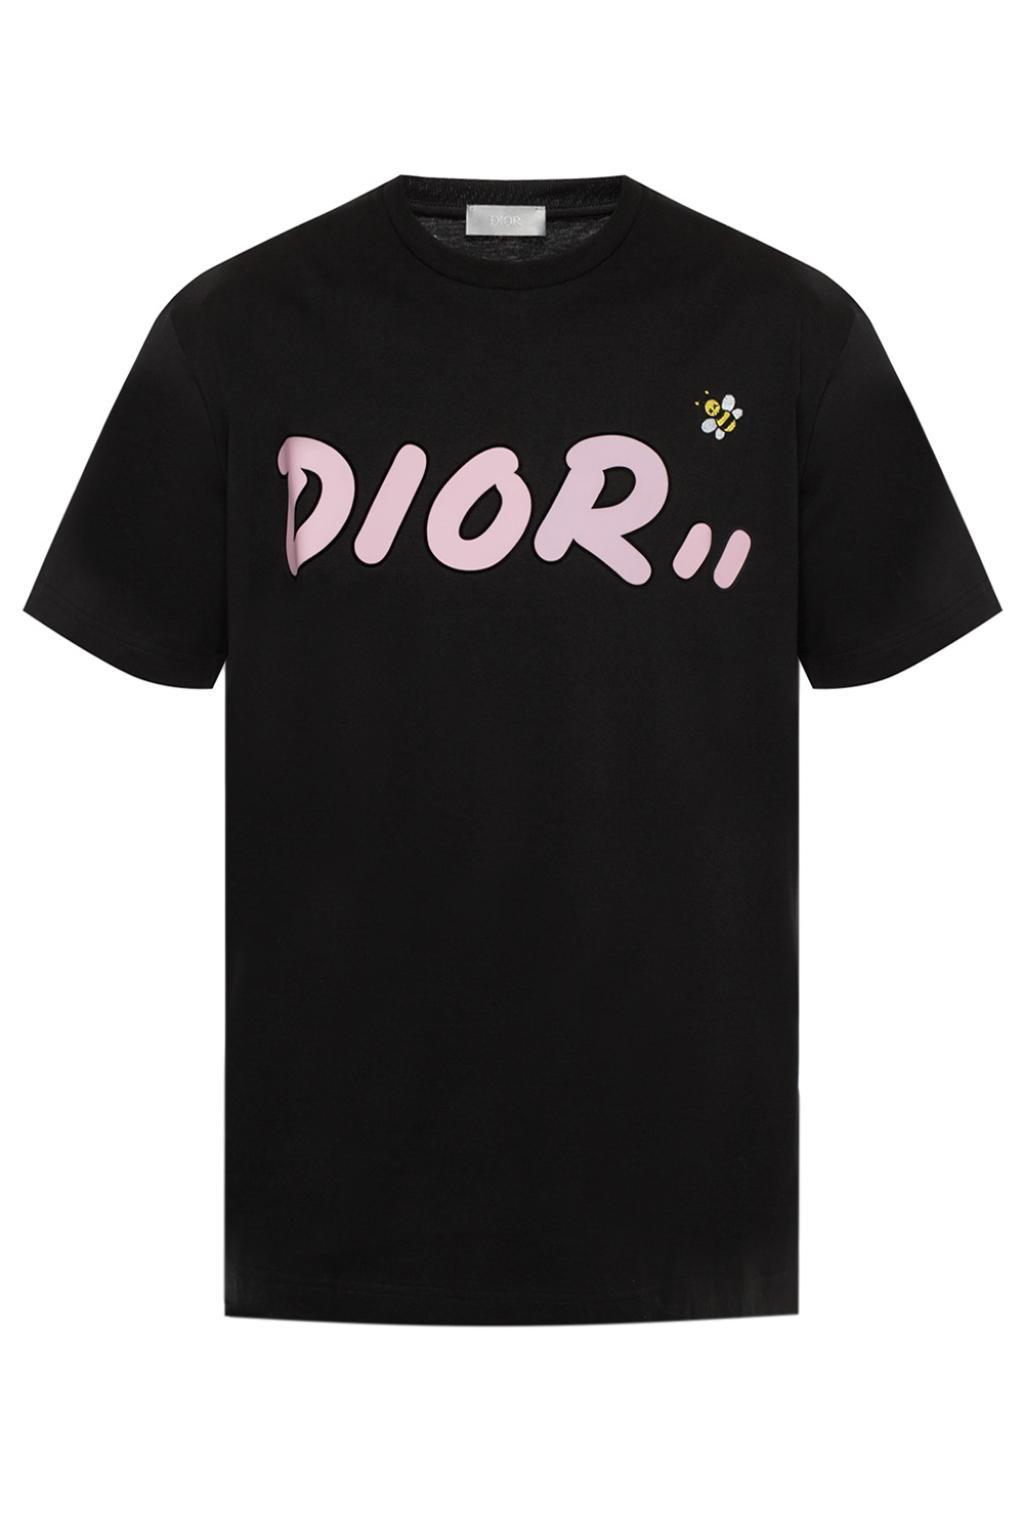 Dior x Kaws All Over Bee Embroidered T Shirt  Olivers Archive